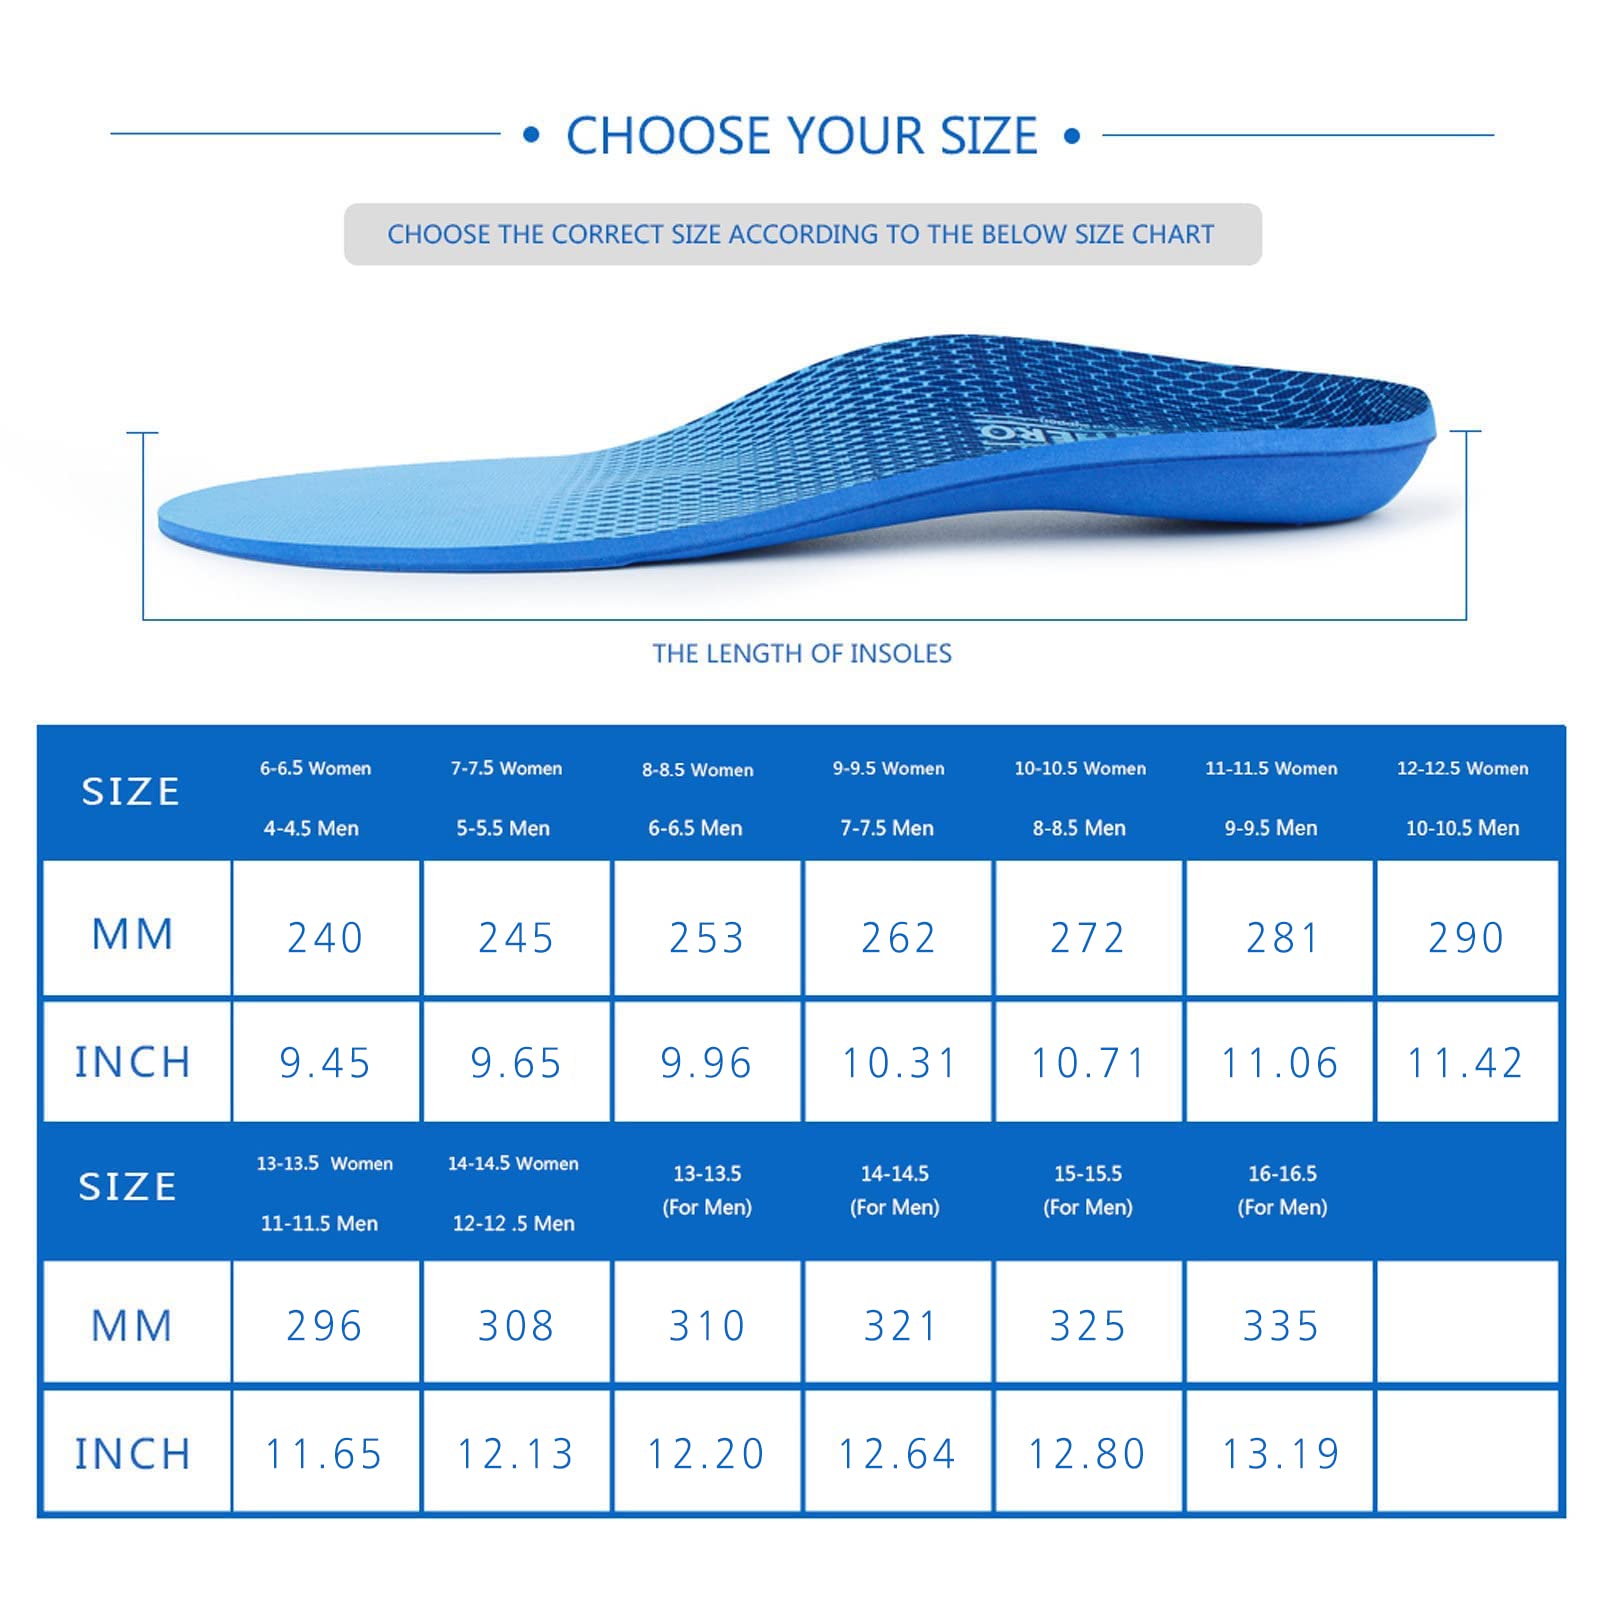 Plantar Fasciitis Feet Insoles Arch Supports Orthotics Inserts Relieve Flat Feet, High Arch, Foot Pain Mens 6-6 1/2 | Womens 8-8 1/2